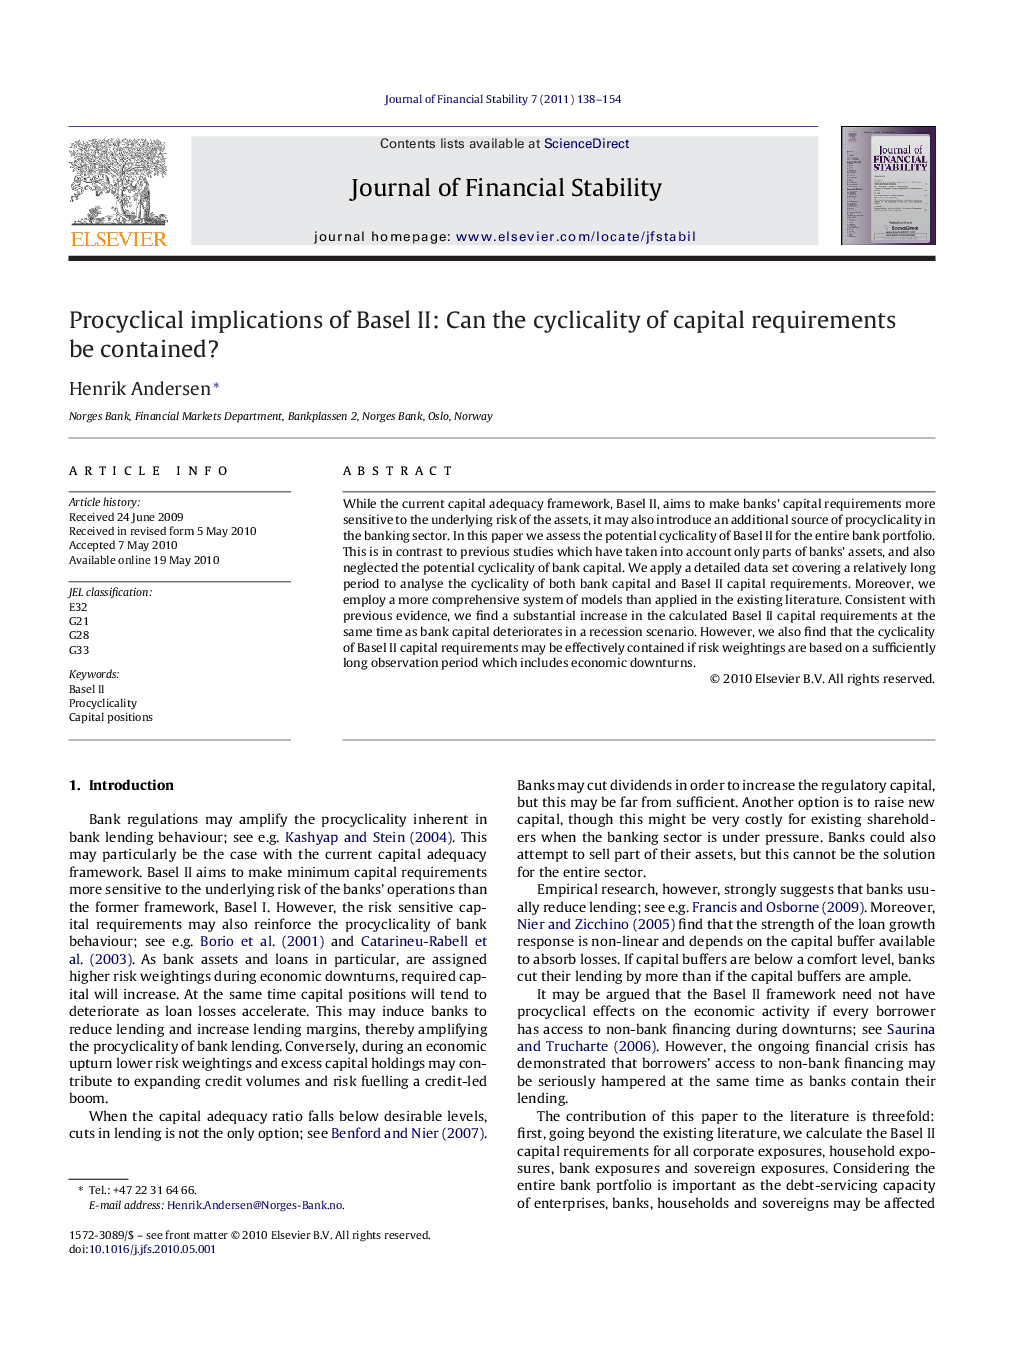 Procyclical implications of Basel II: Can the cyclicality of capital requirements be contained?